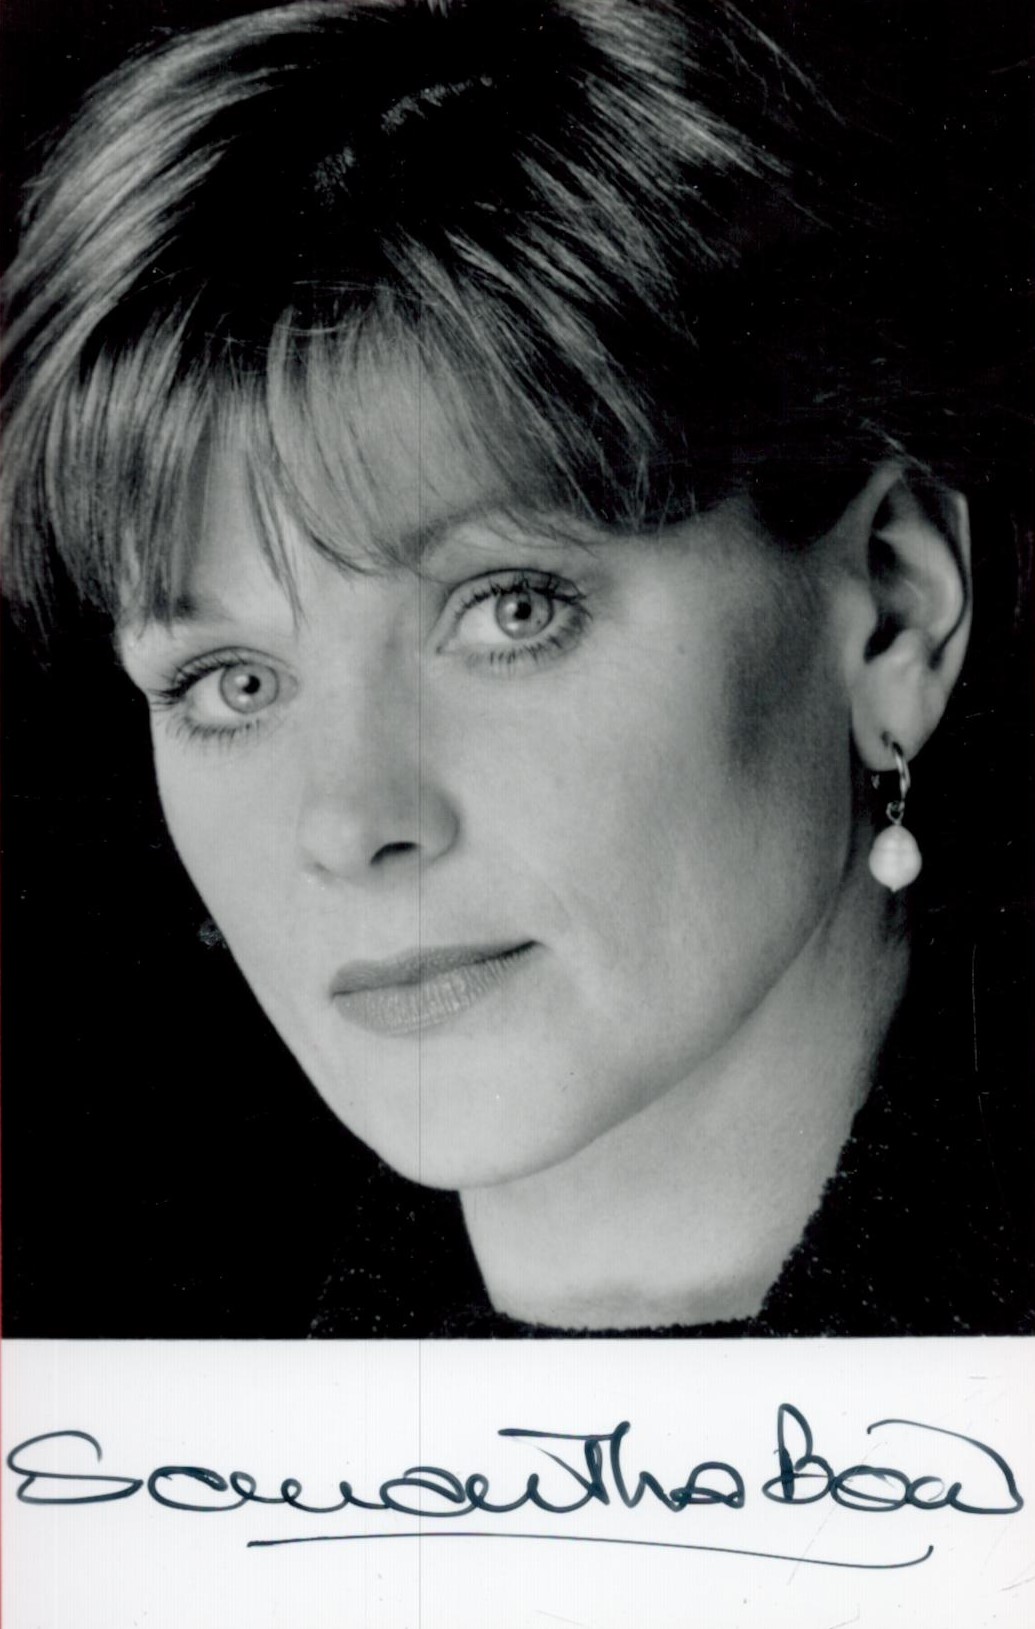 British Actress Samantha Bond Signed 5.5 x 3.5 inch Black and White Photo. Signed in black ink. Good